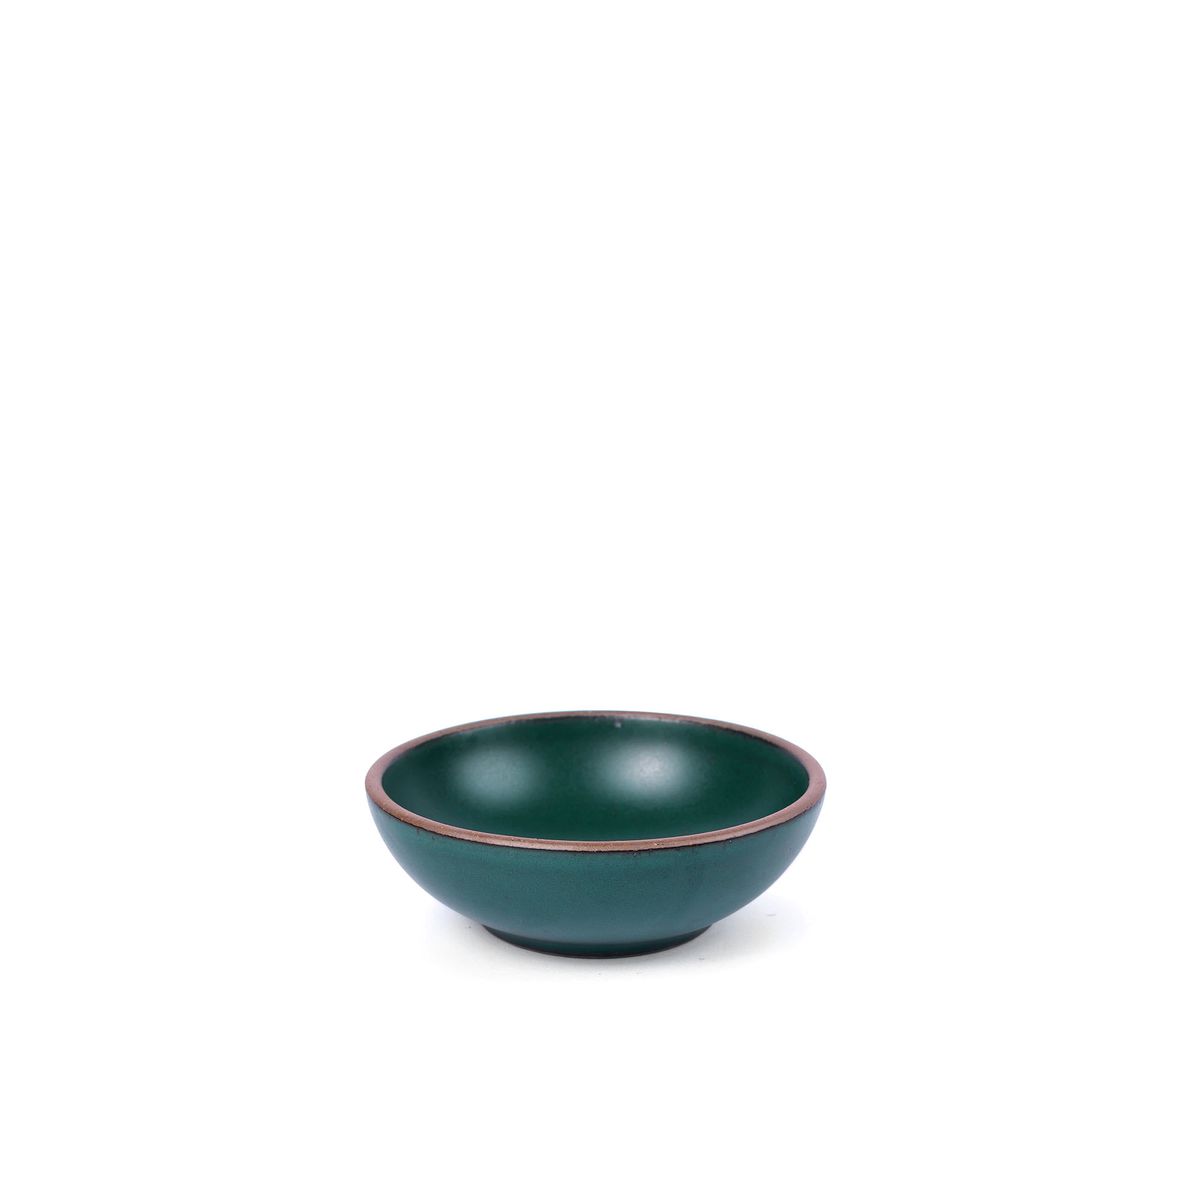 A small shallow ceramic bowl in a deep dark teal color featuring iron speckles and an unglazed rim